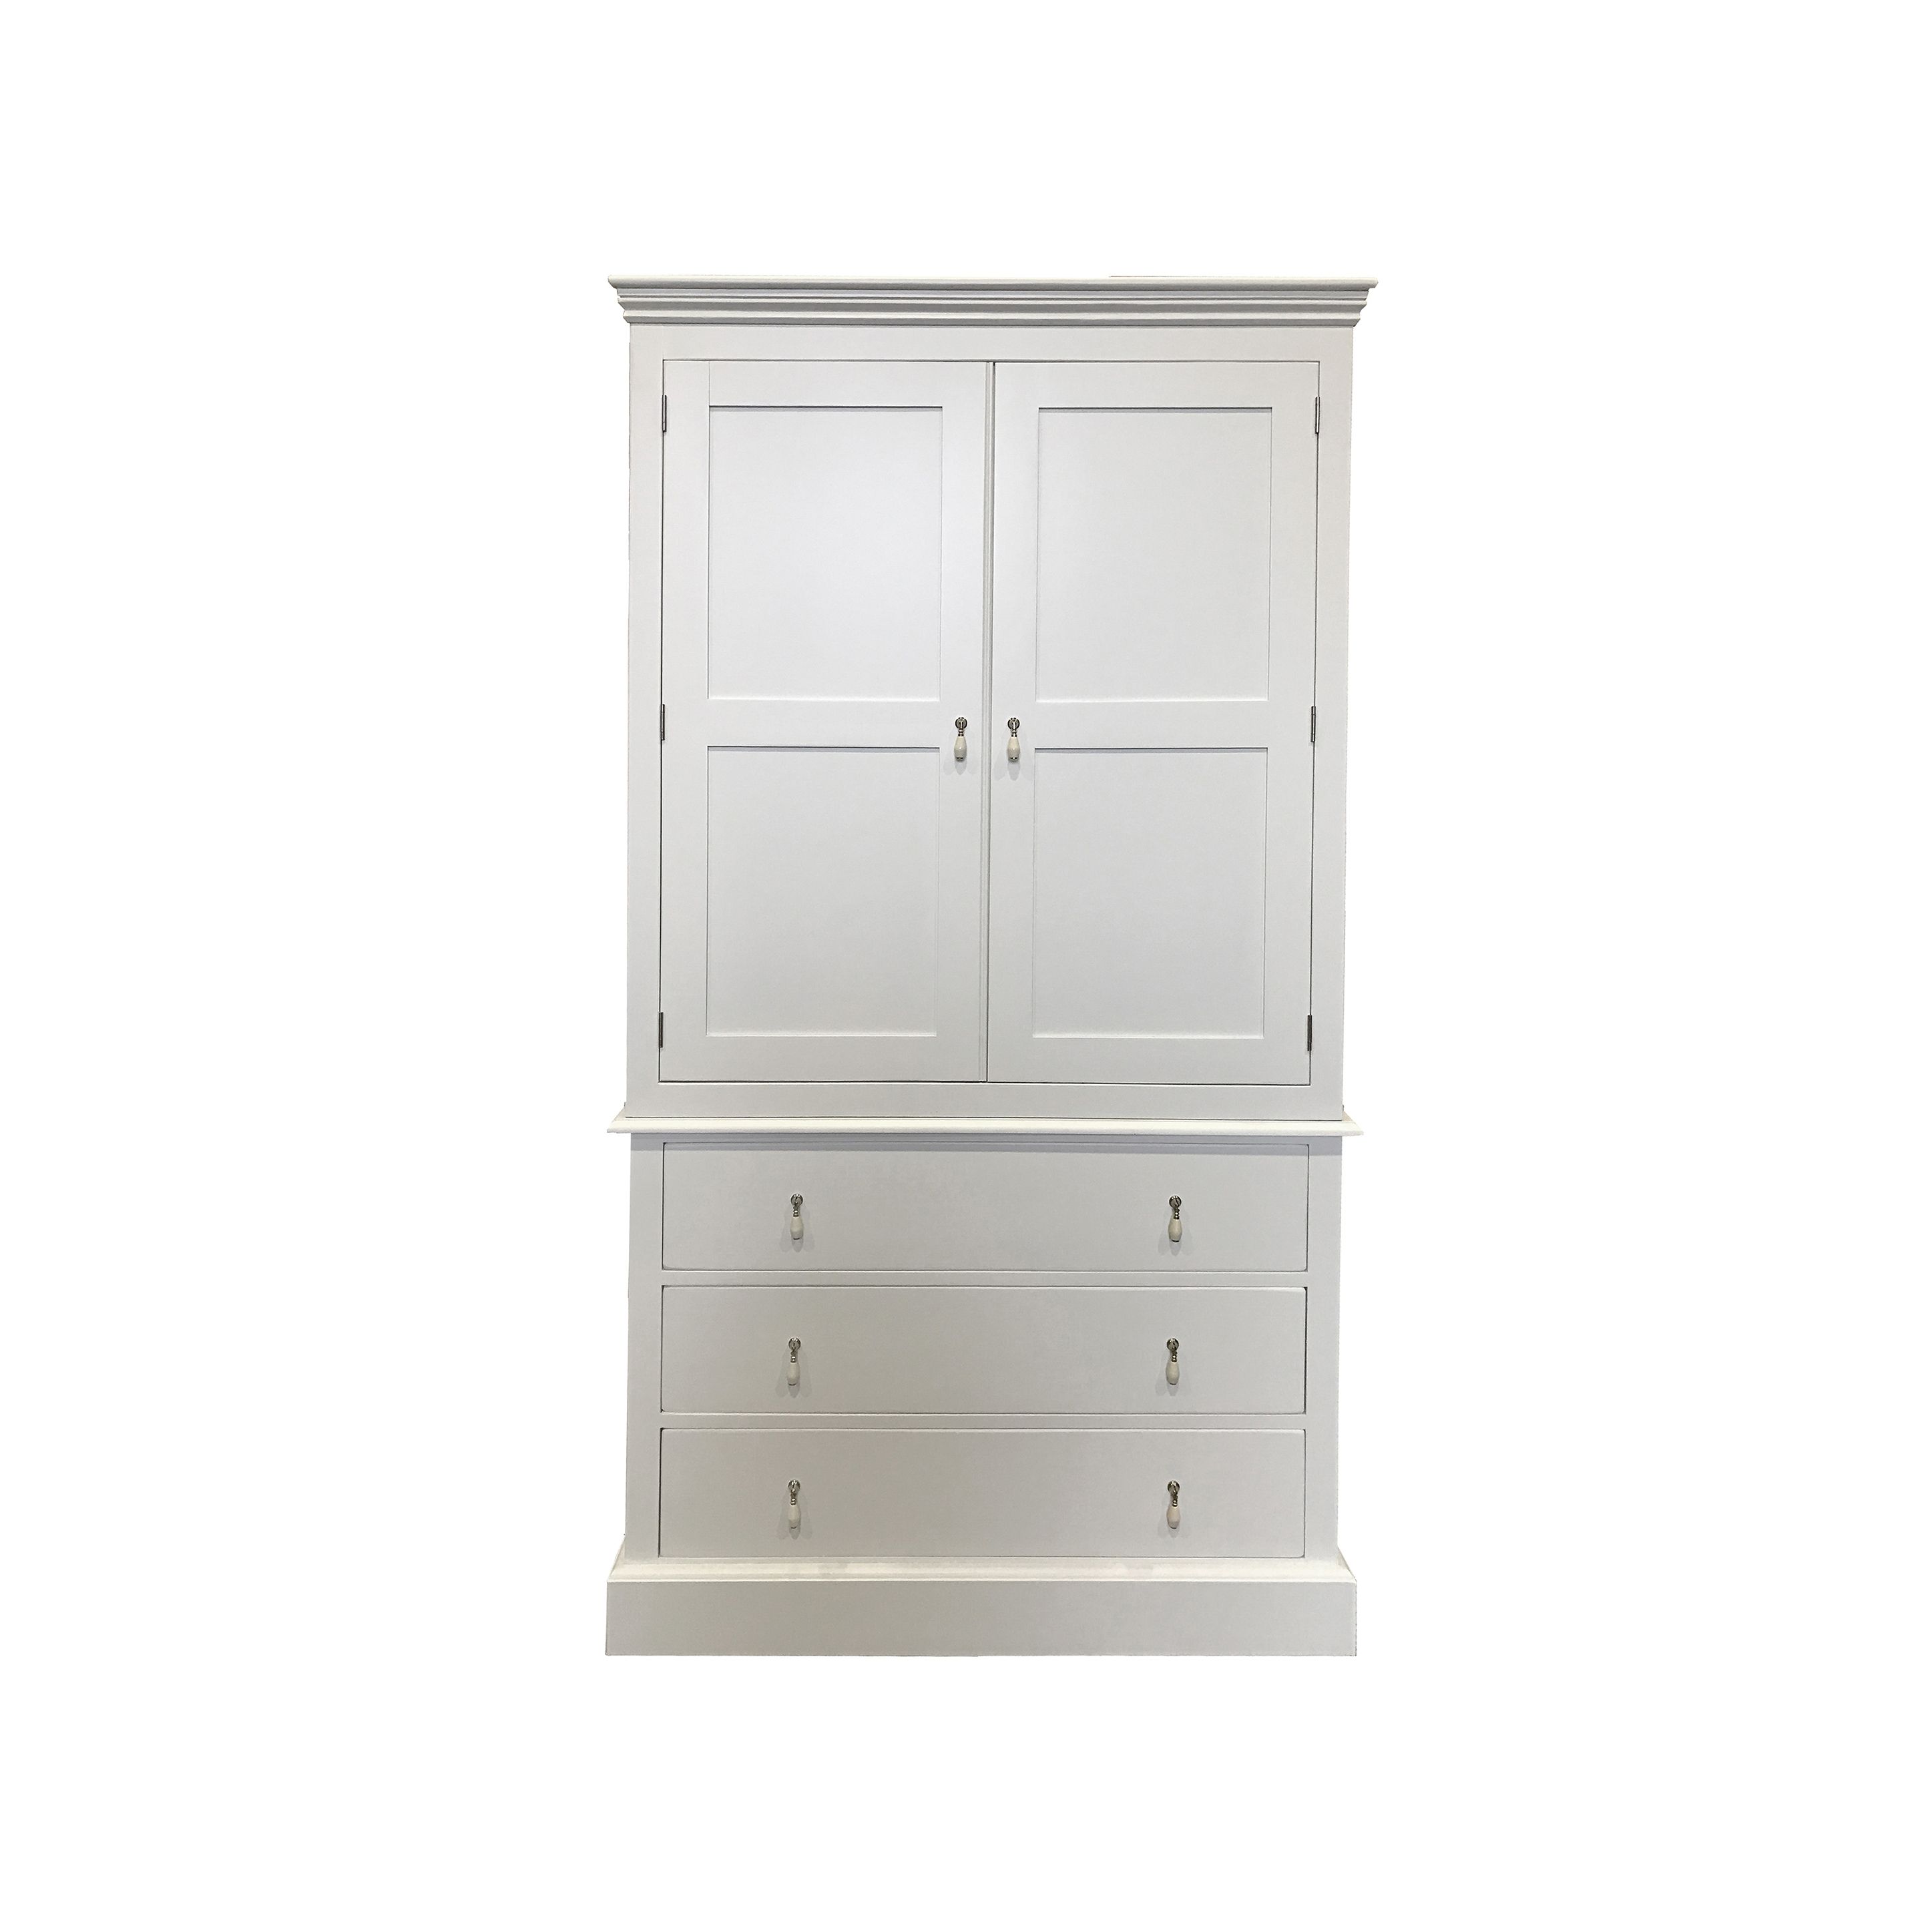 Wardrobes And Chest Of Drawers Combined In 2017 3 Drawer Double Combination Wardrobe – Wimborne White – Kensington (View 7 of 15)